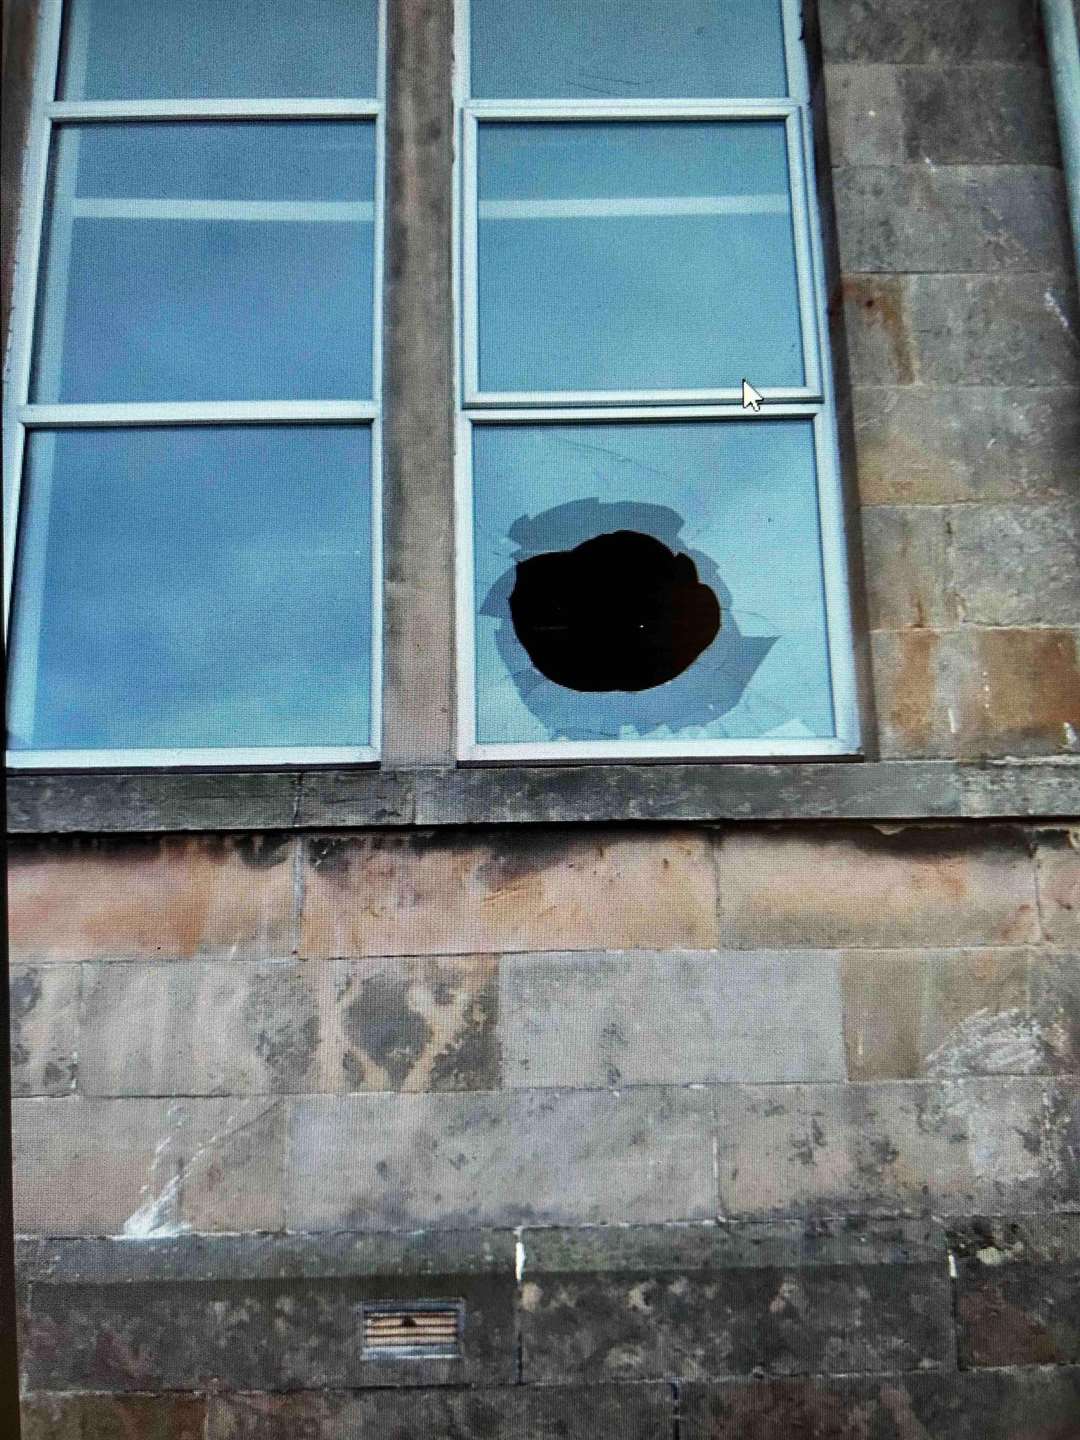 Police are appealing for information after a window was smashed at Buckie High. Picture: Police Scotland